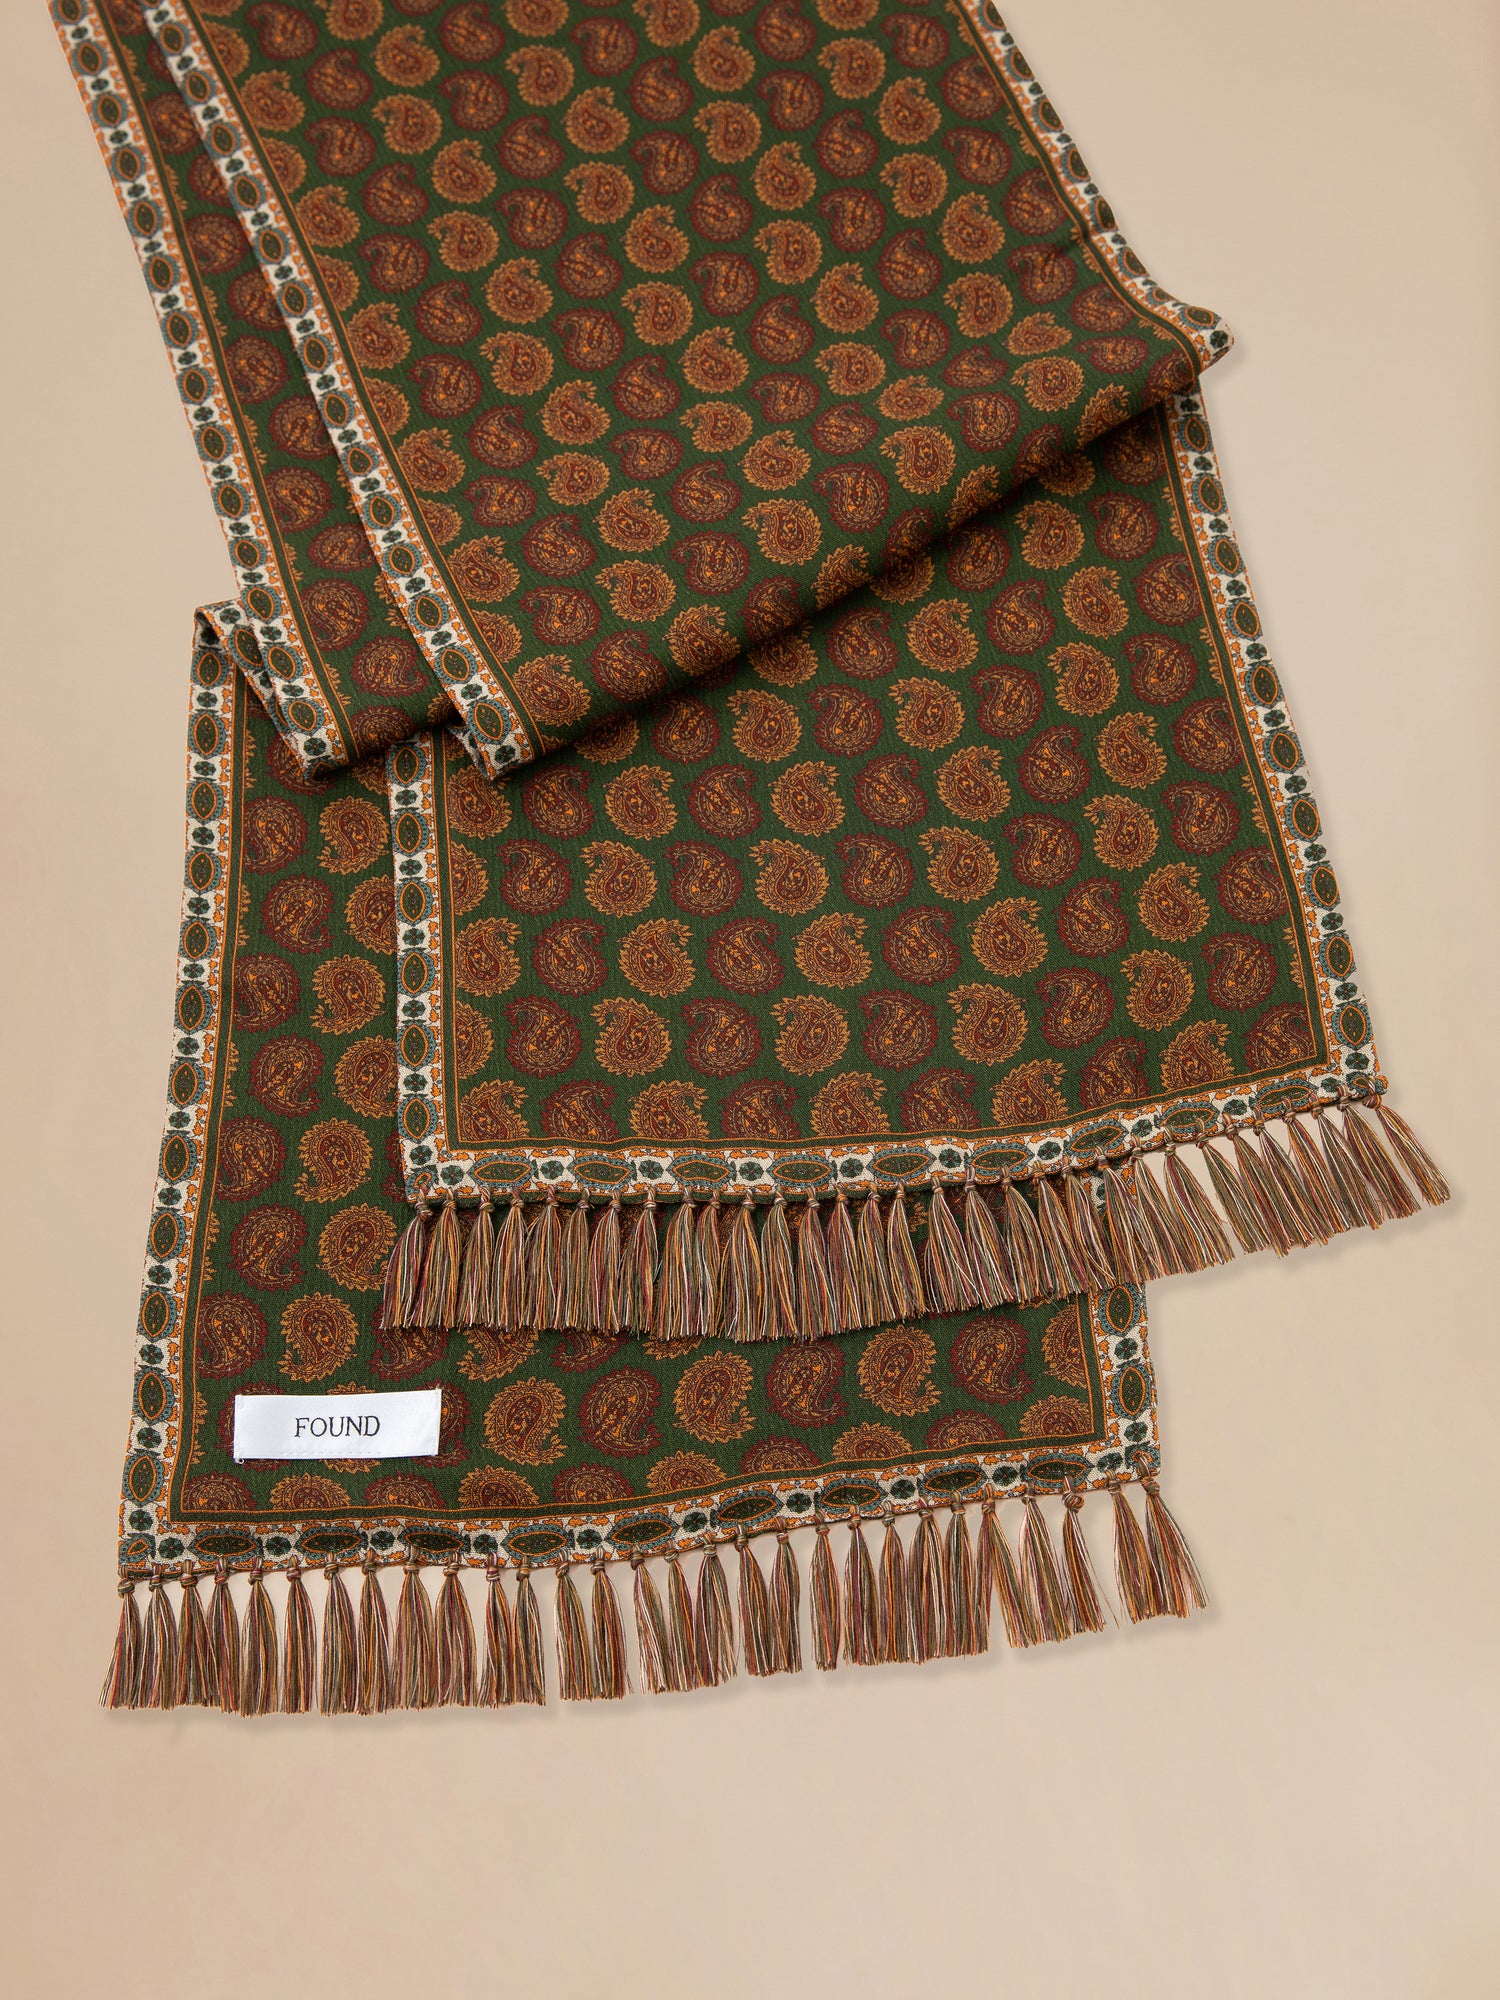 A Paisley Forest Scarf with fringes on it by Found.